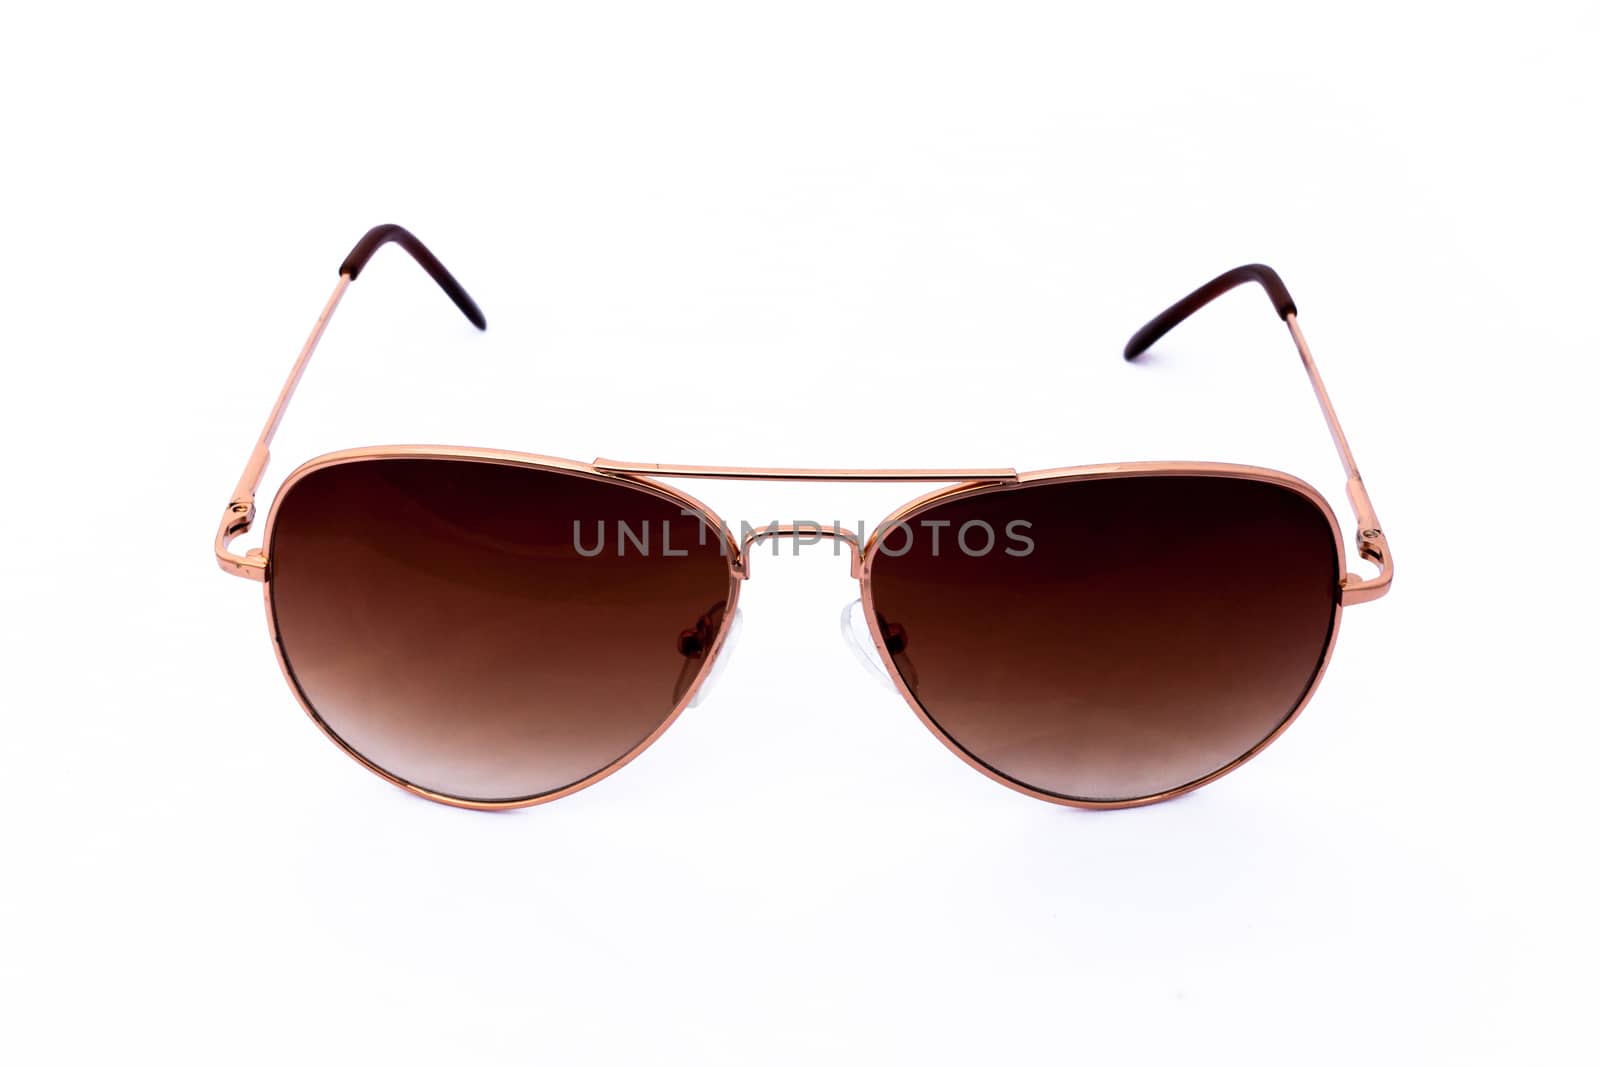 Object elegant sunglasses isolated on the white by nopparats